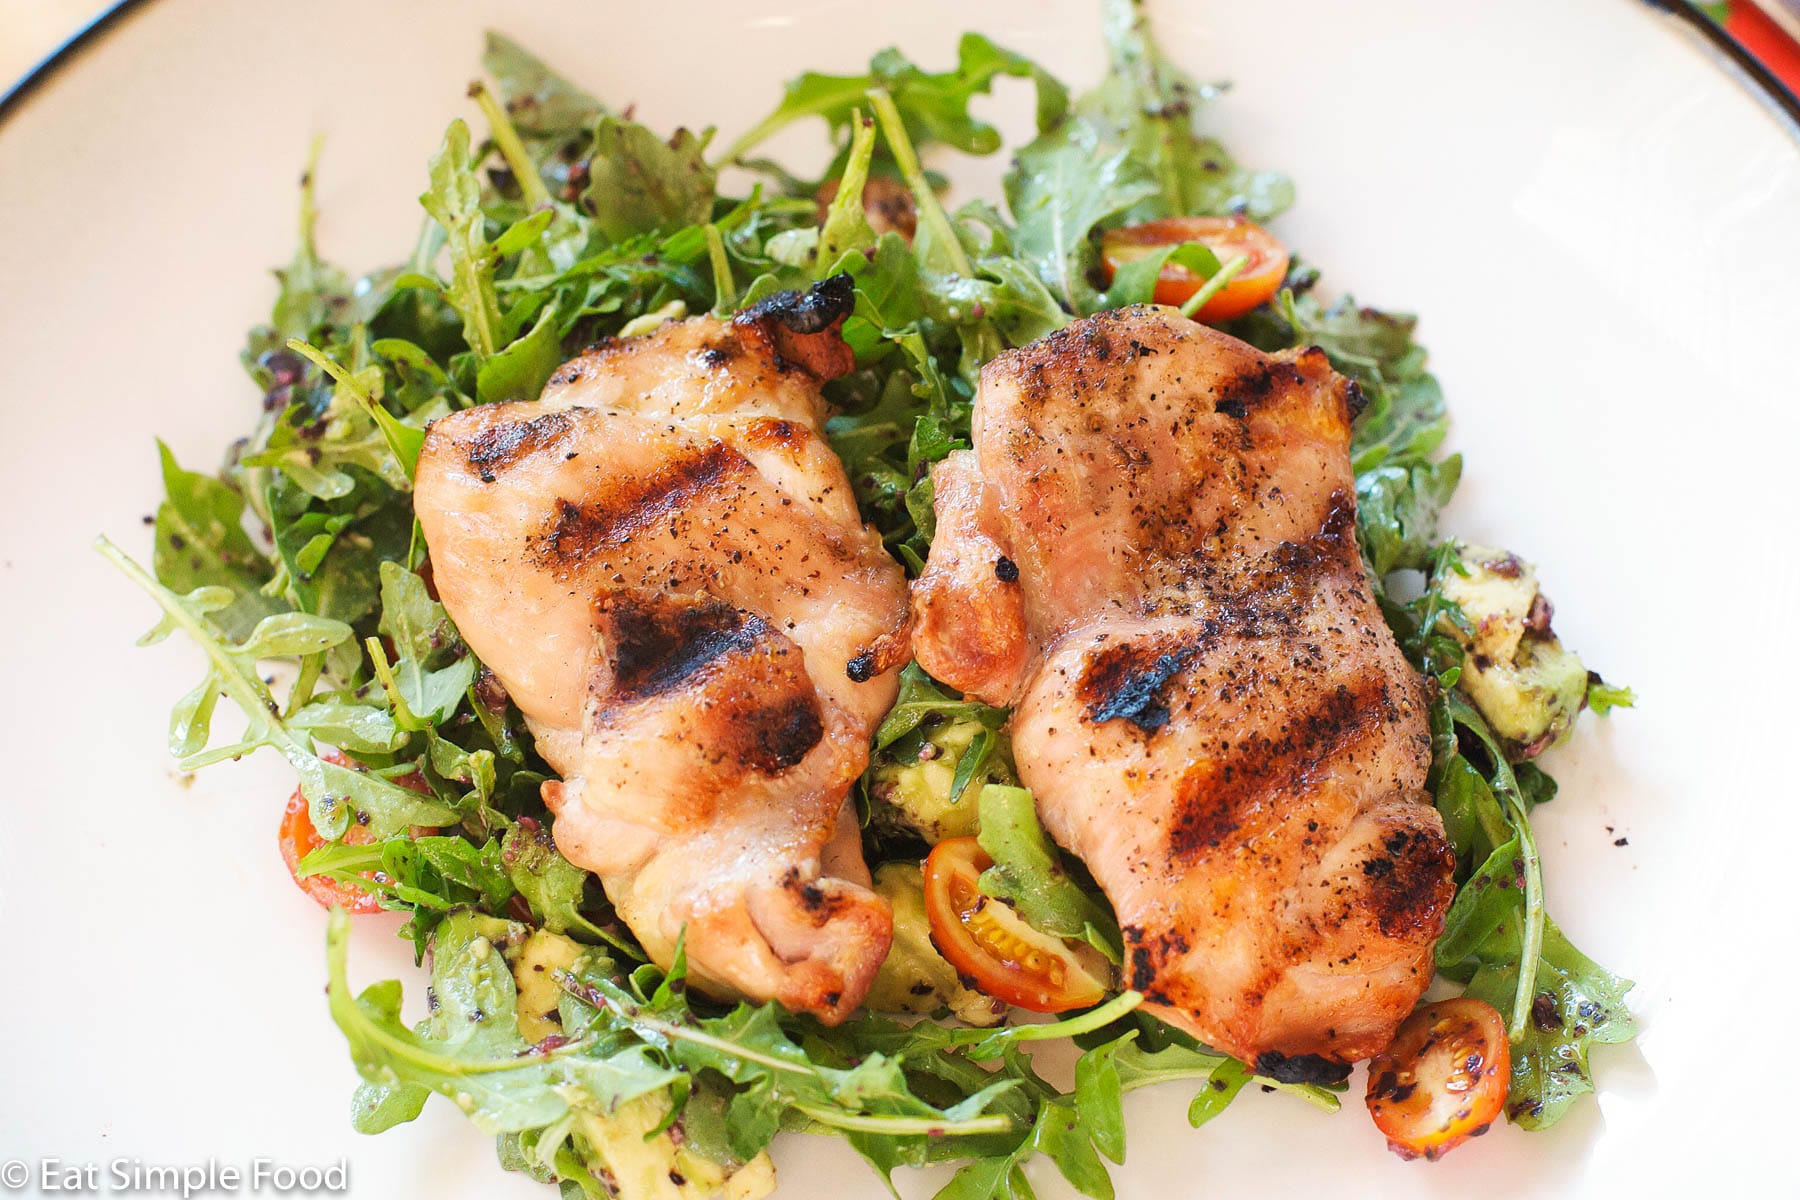 2 grilled chicken thighs over a bed of arugula salad w/ halved cherry tomatoes and diced avocado. On a white plate.